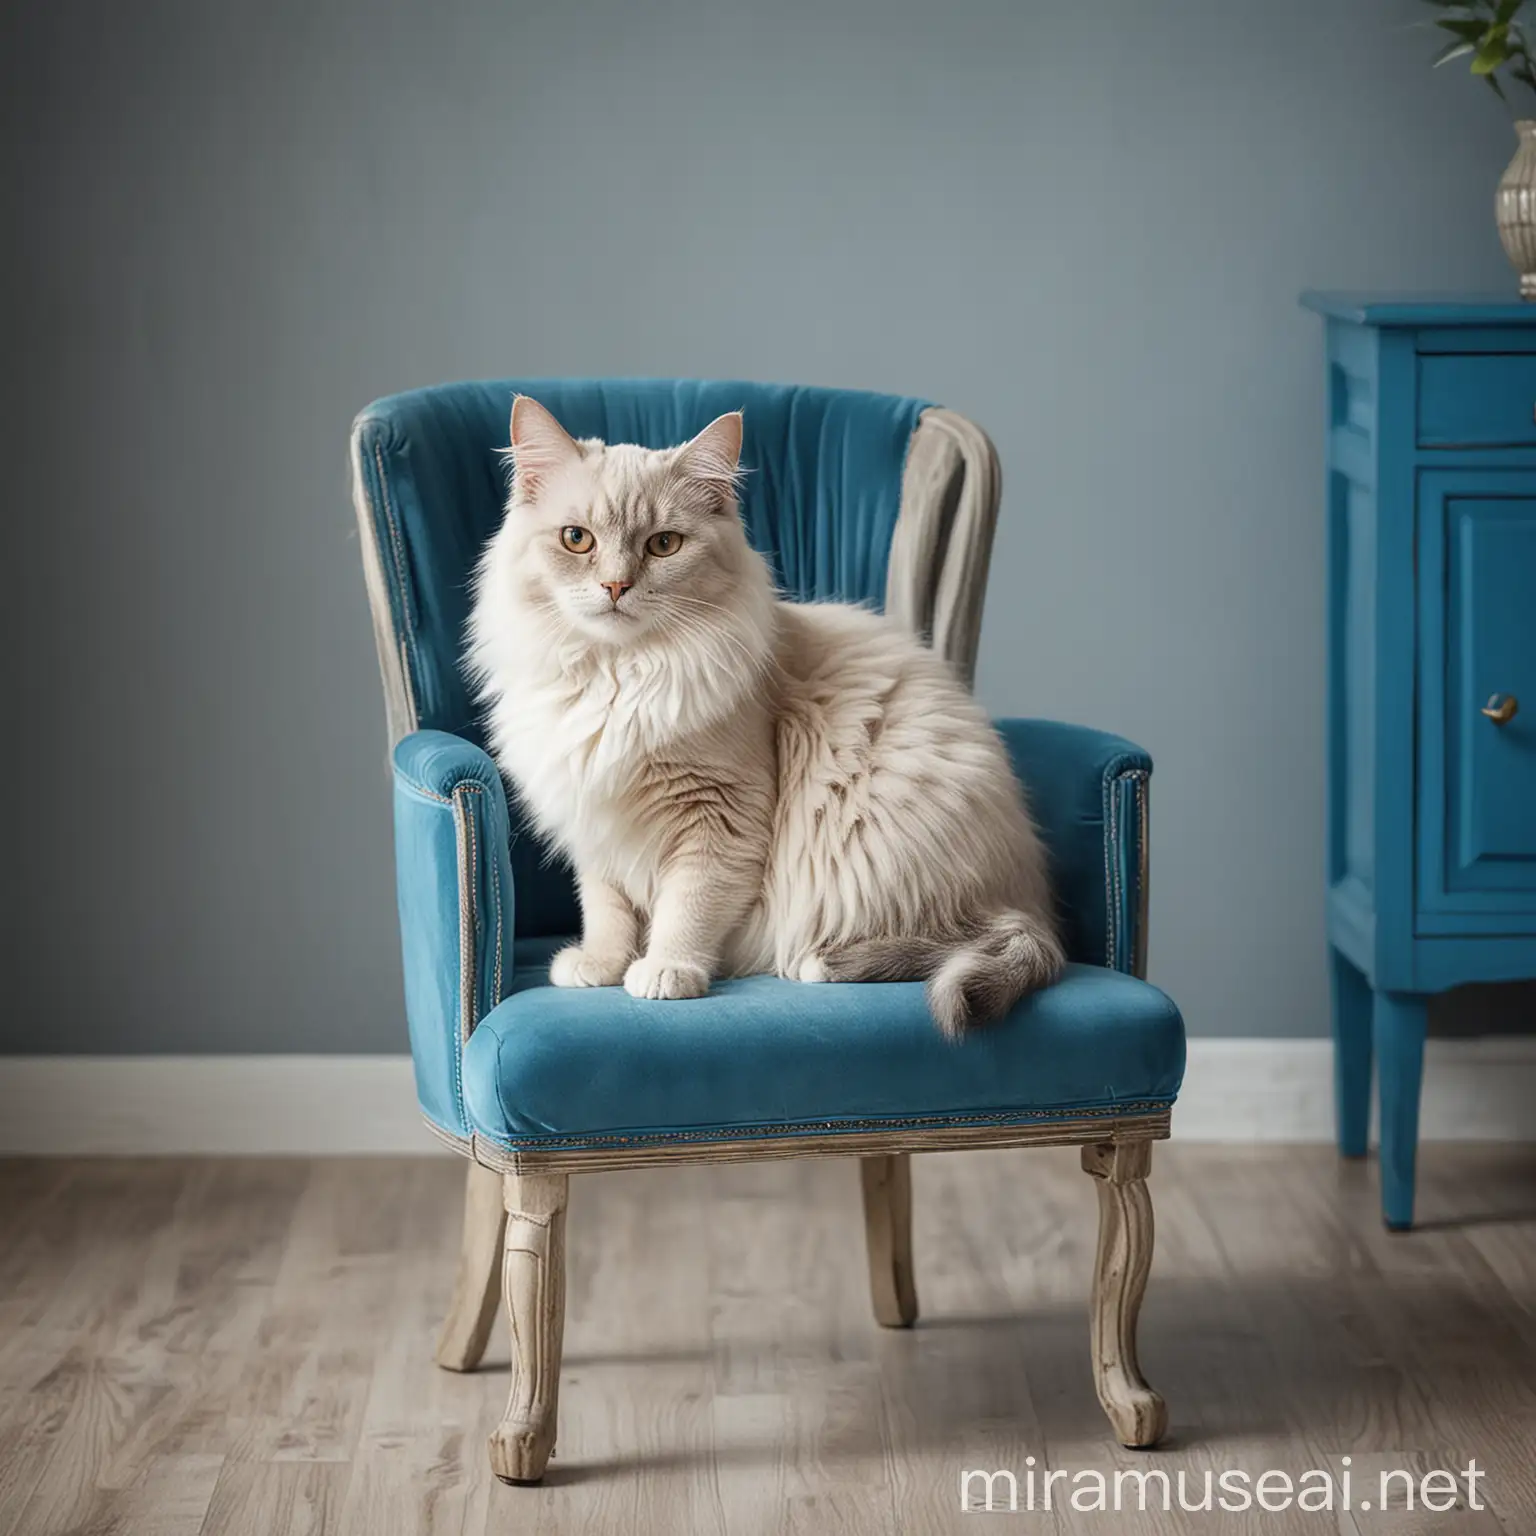 Don Sphynx Cat Sitting on Bright Blue Chair in Room